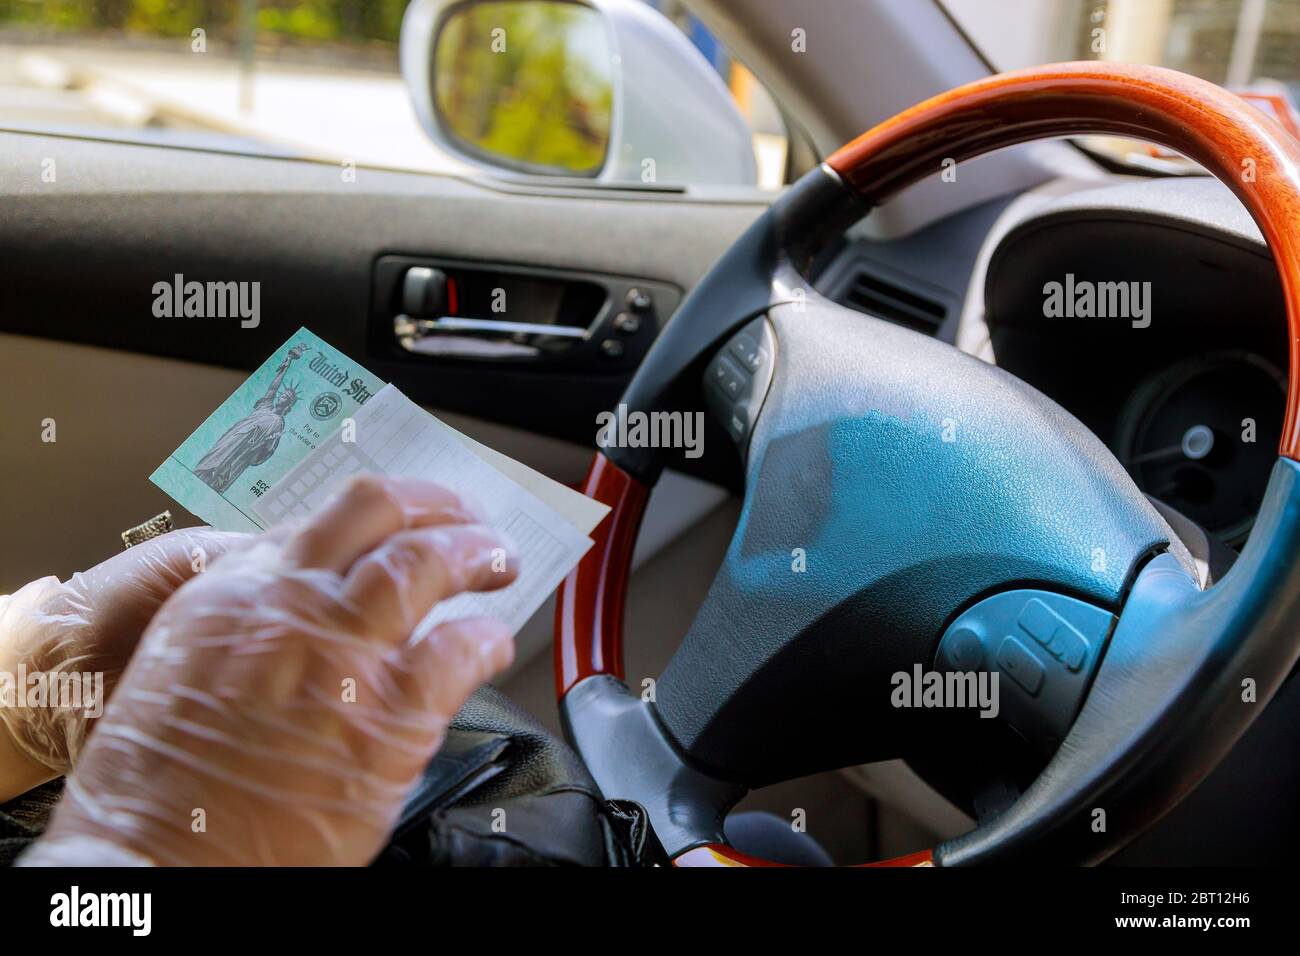 Writing a paper slip depositing government stimulus check with gloves on for safety in car Stock Photo